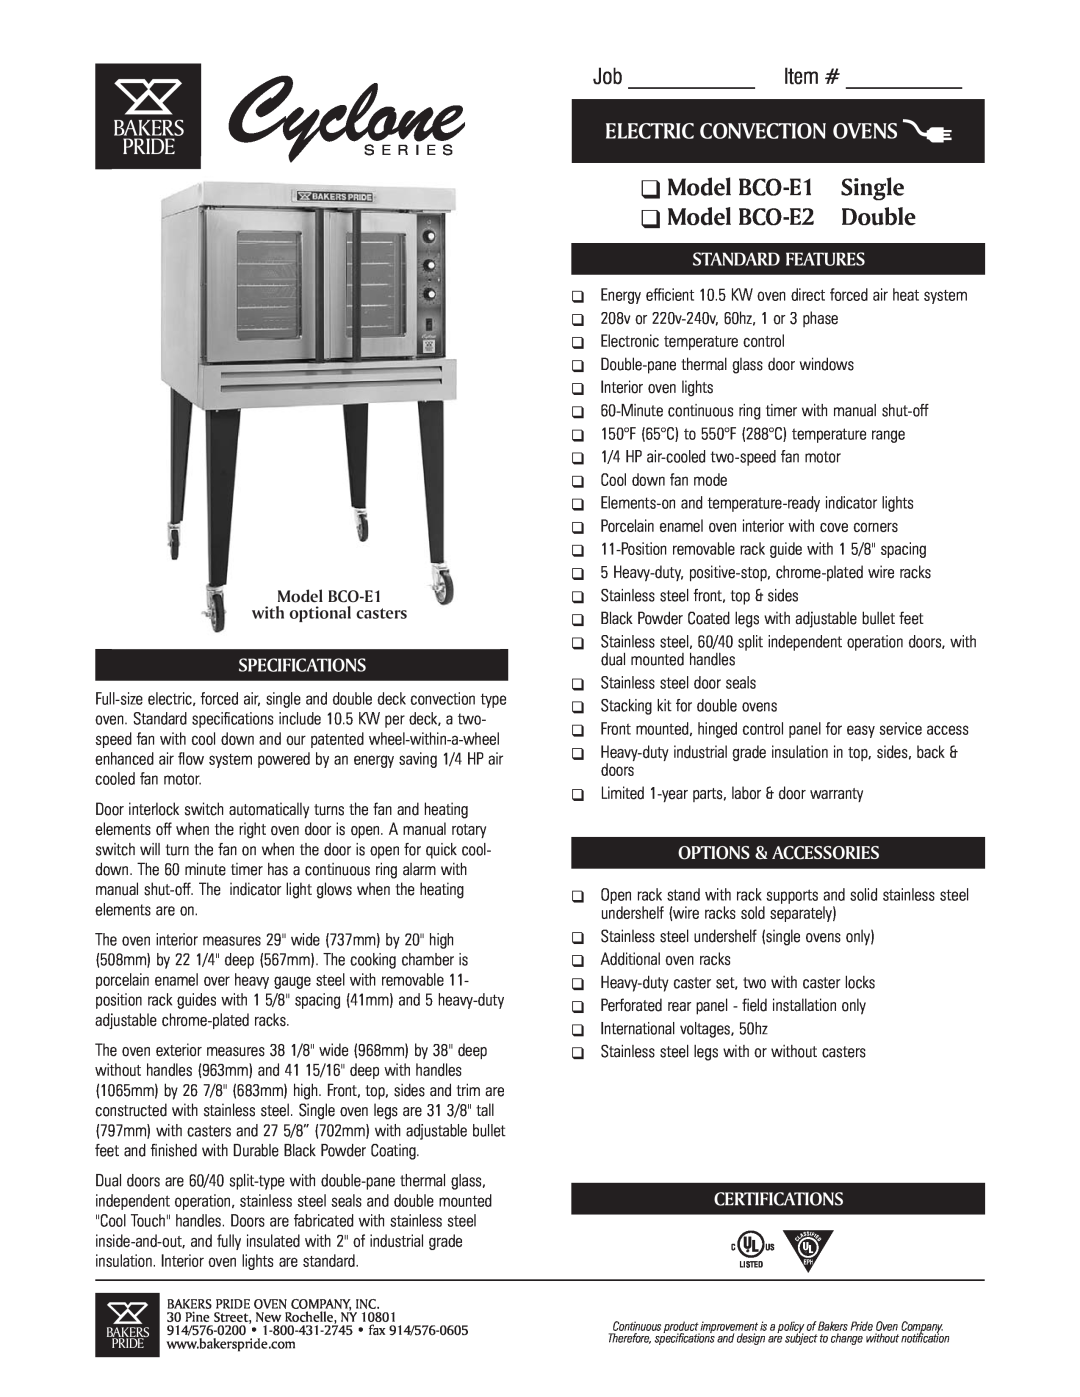 Bakers Pride Oven EP-1-2828 specifications Model EP-2-2828and CO11-E, Hearthbake & Cyclone Ep Series, Job Item #, BCO-E1 